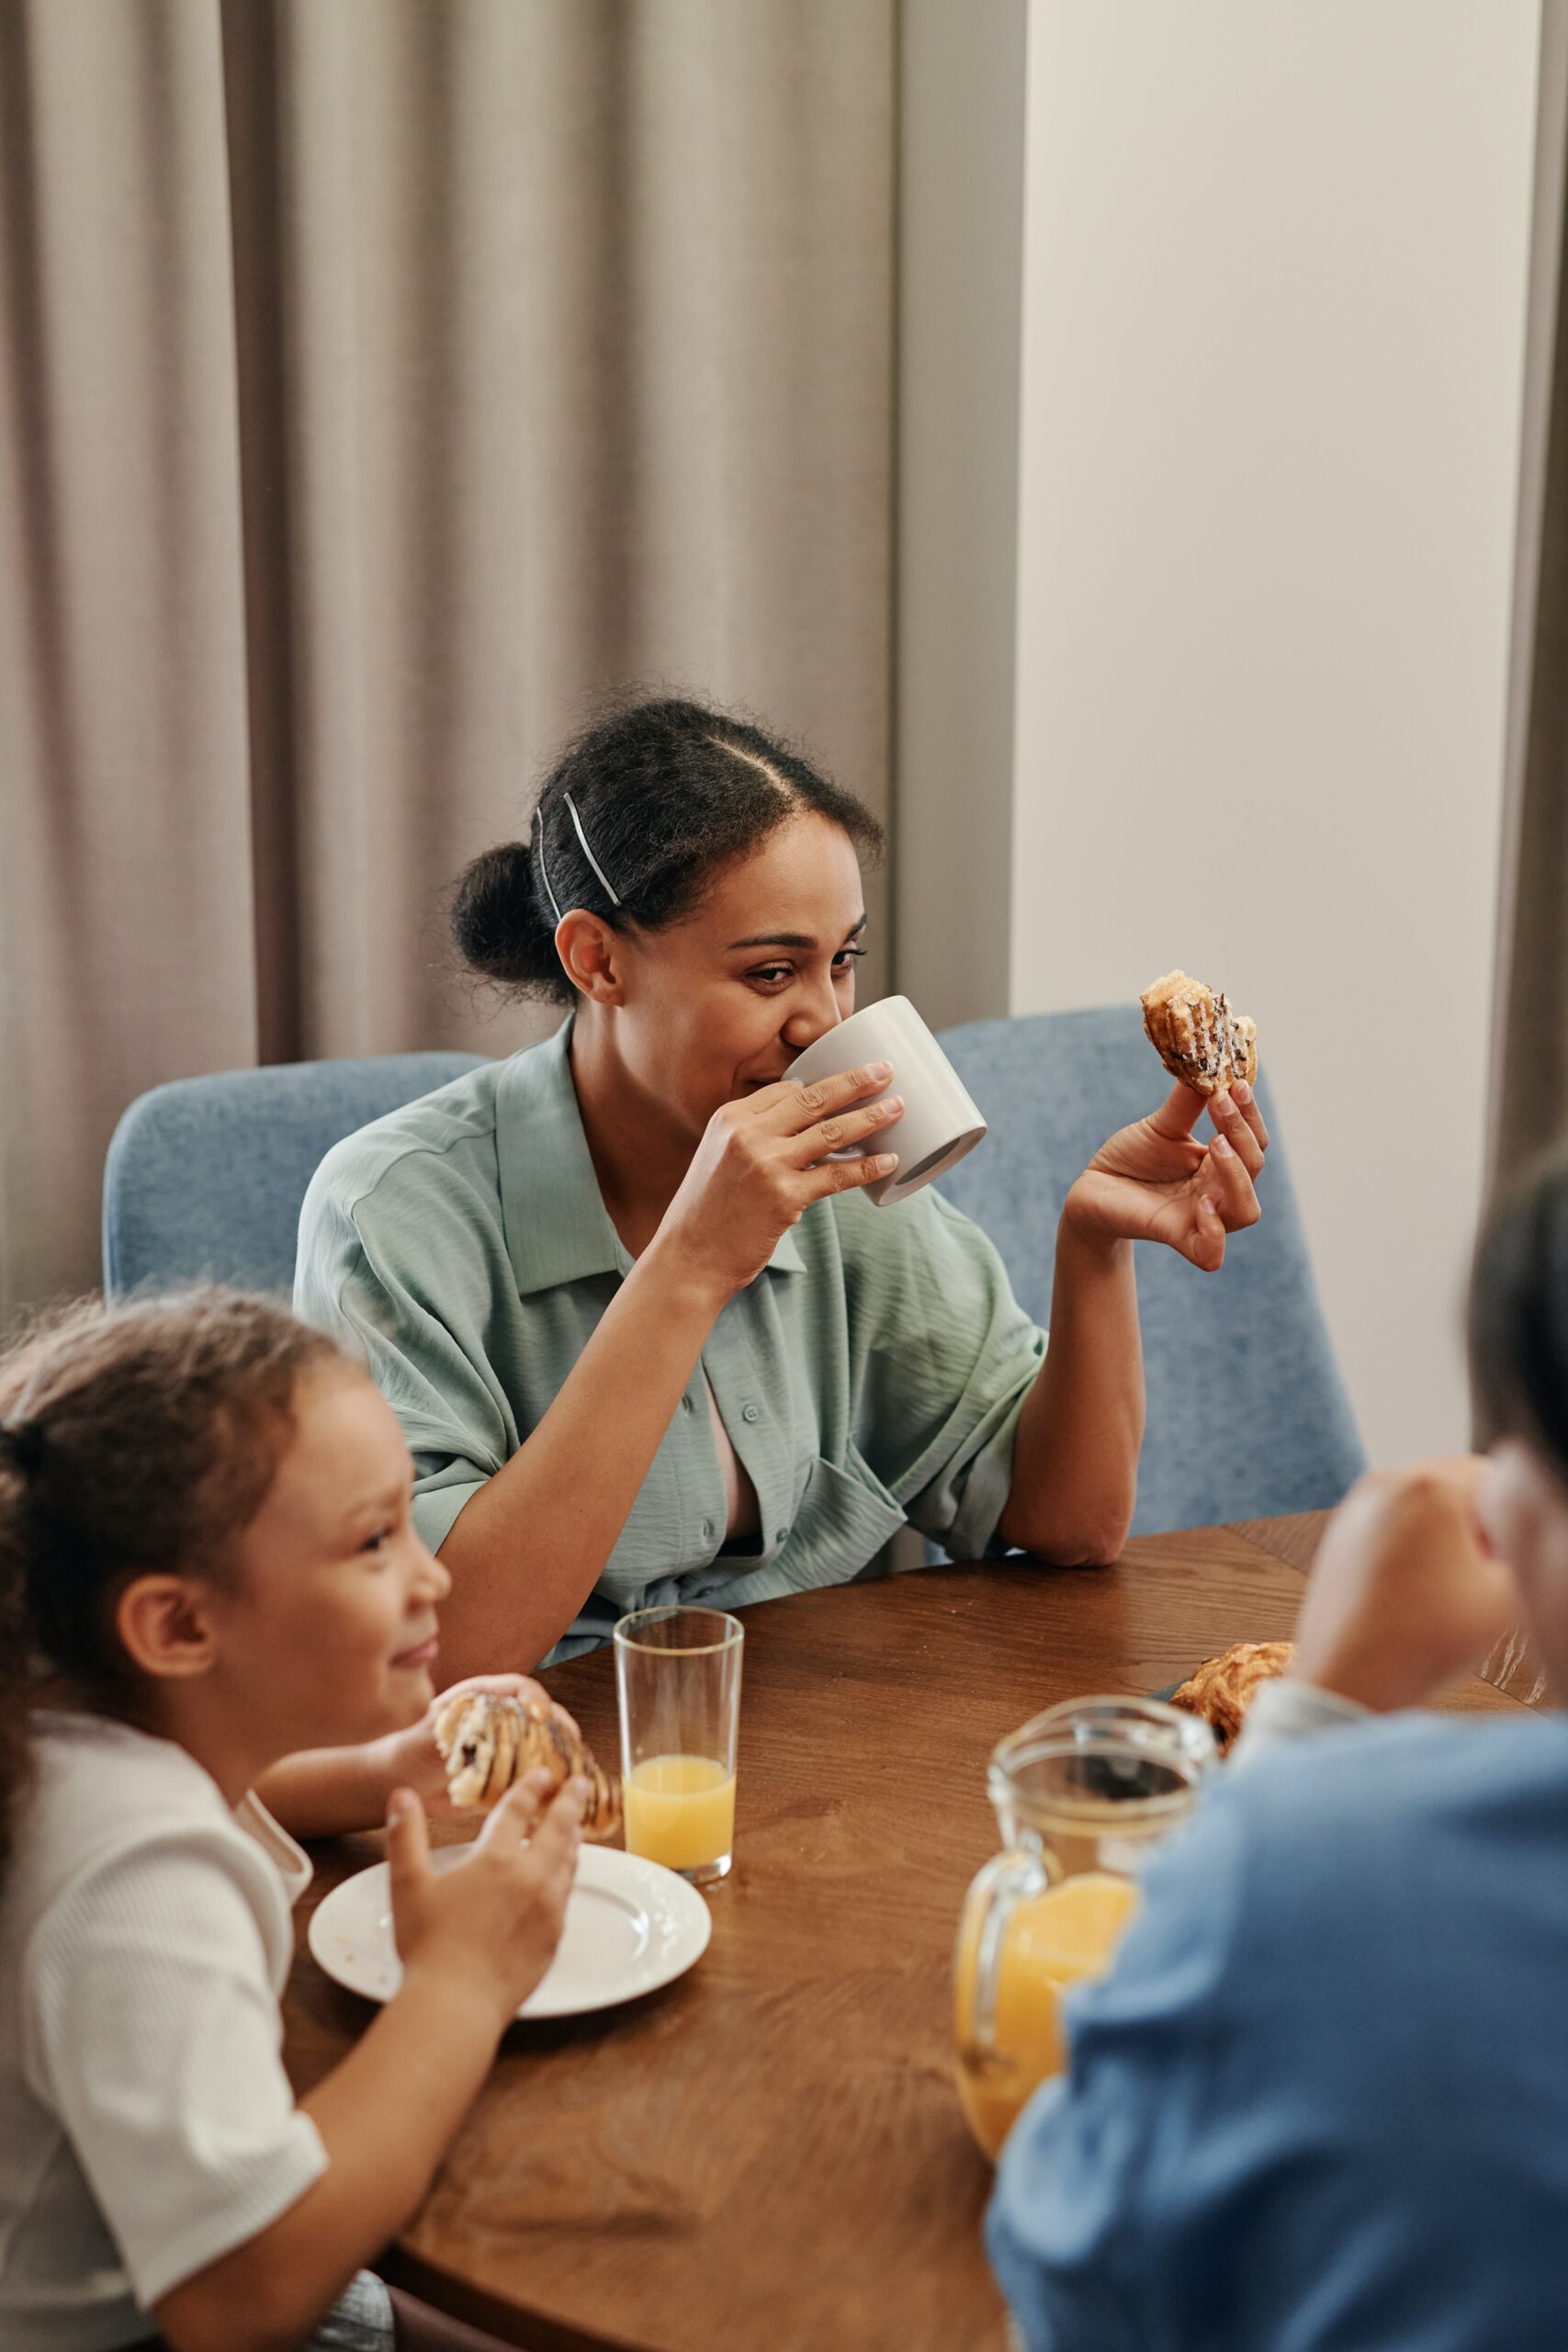 Image of woman eating with her family